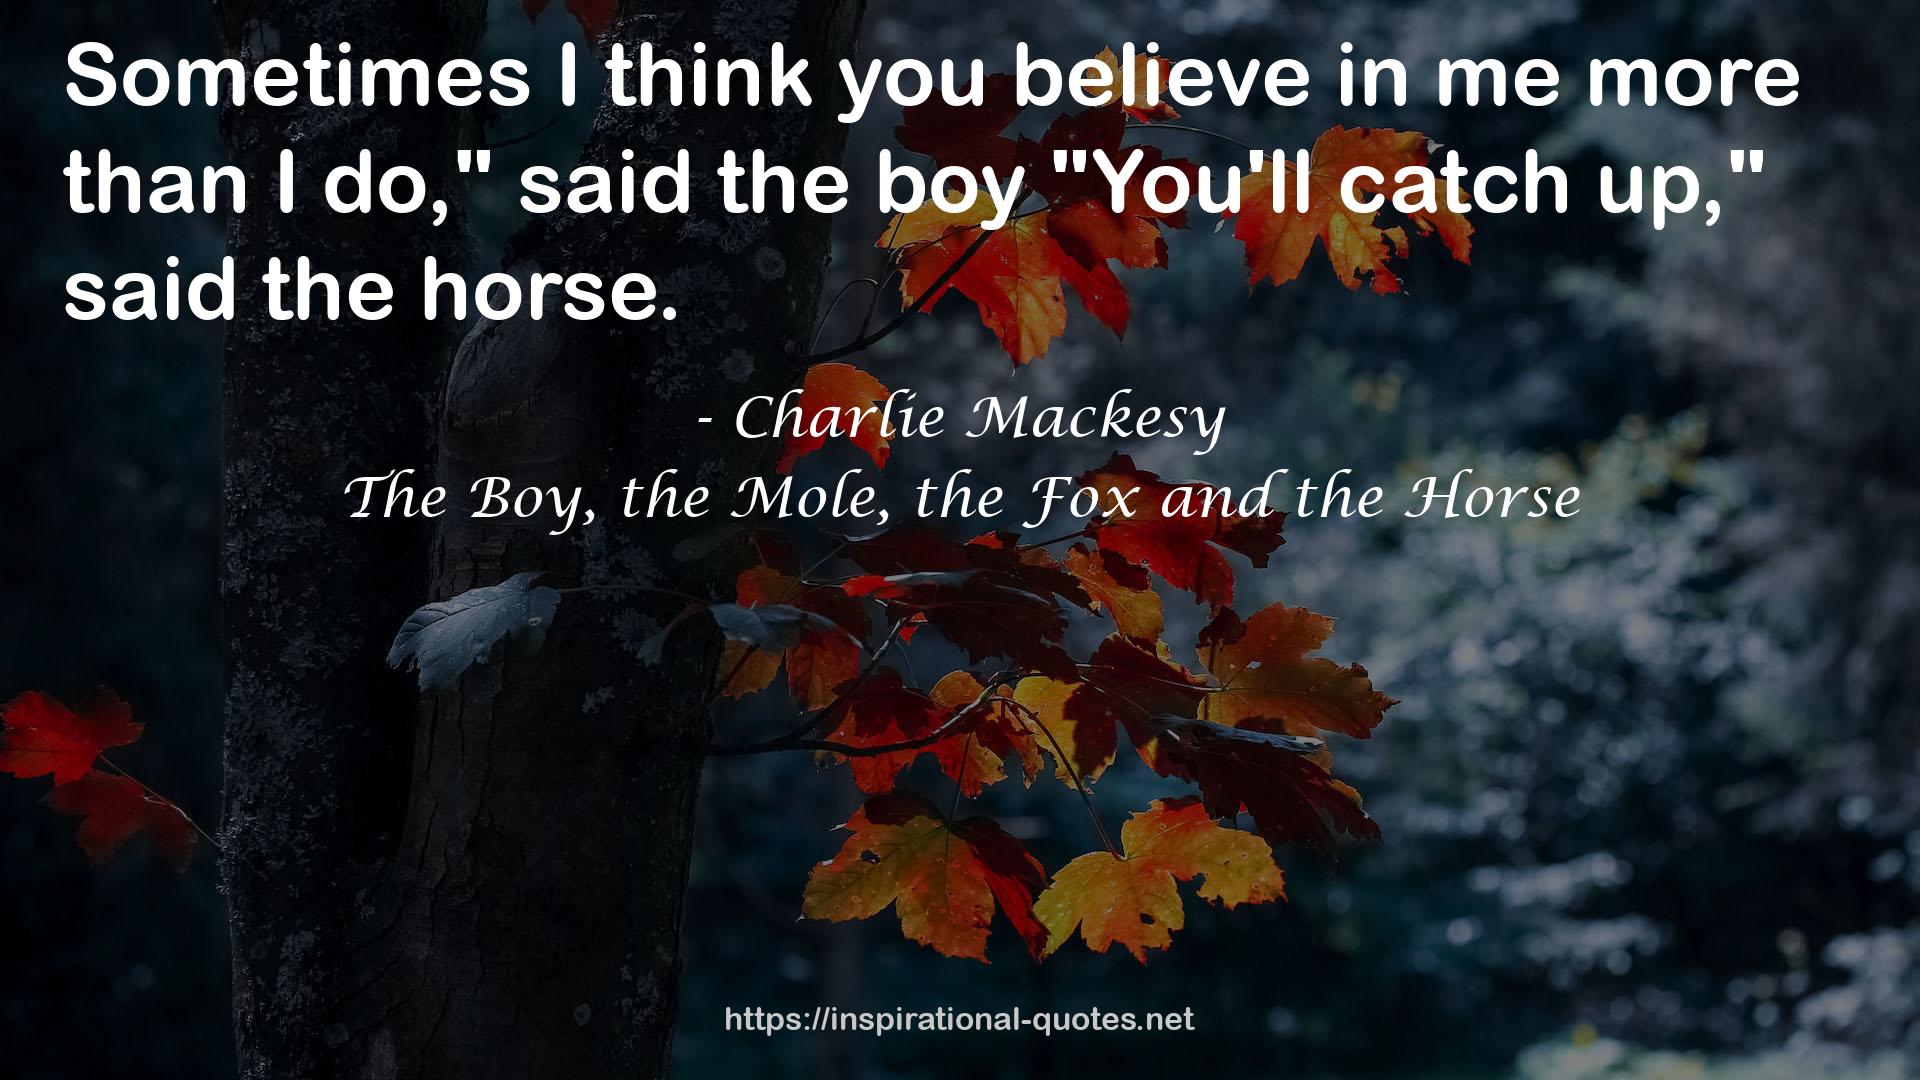 The Boy, the Mole, the Fox and the Horse QUOTES